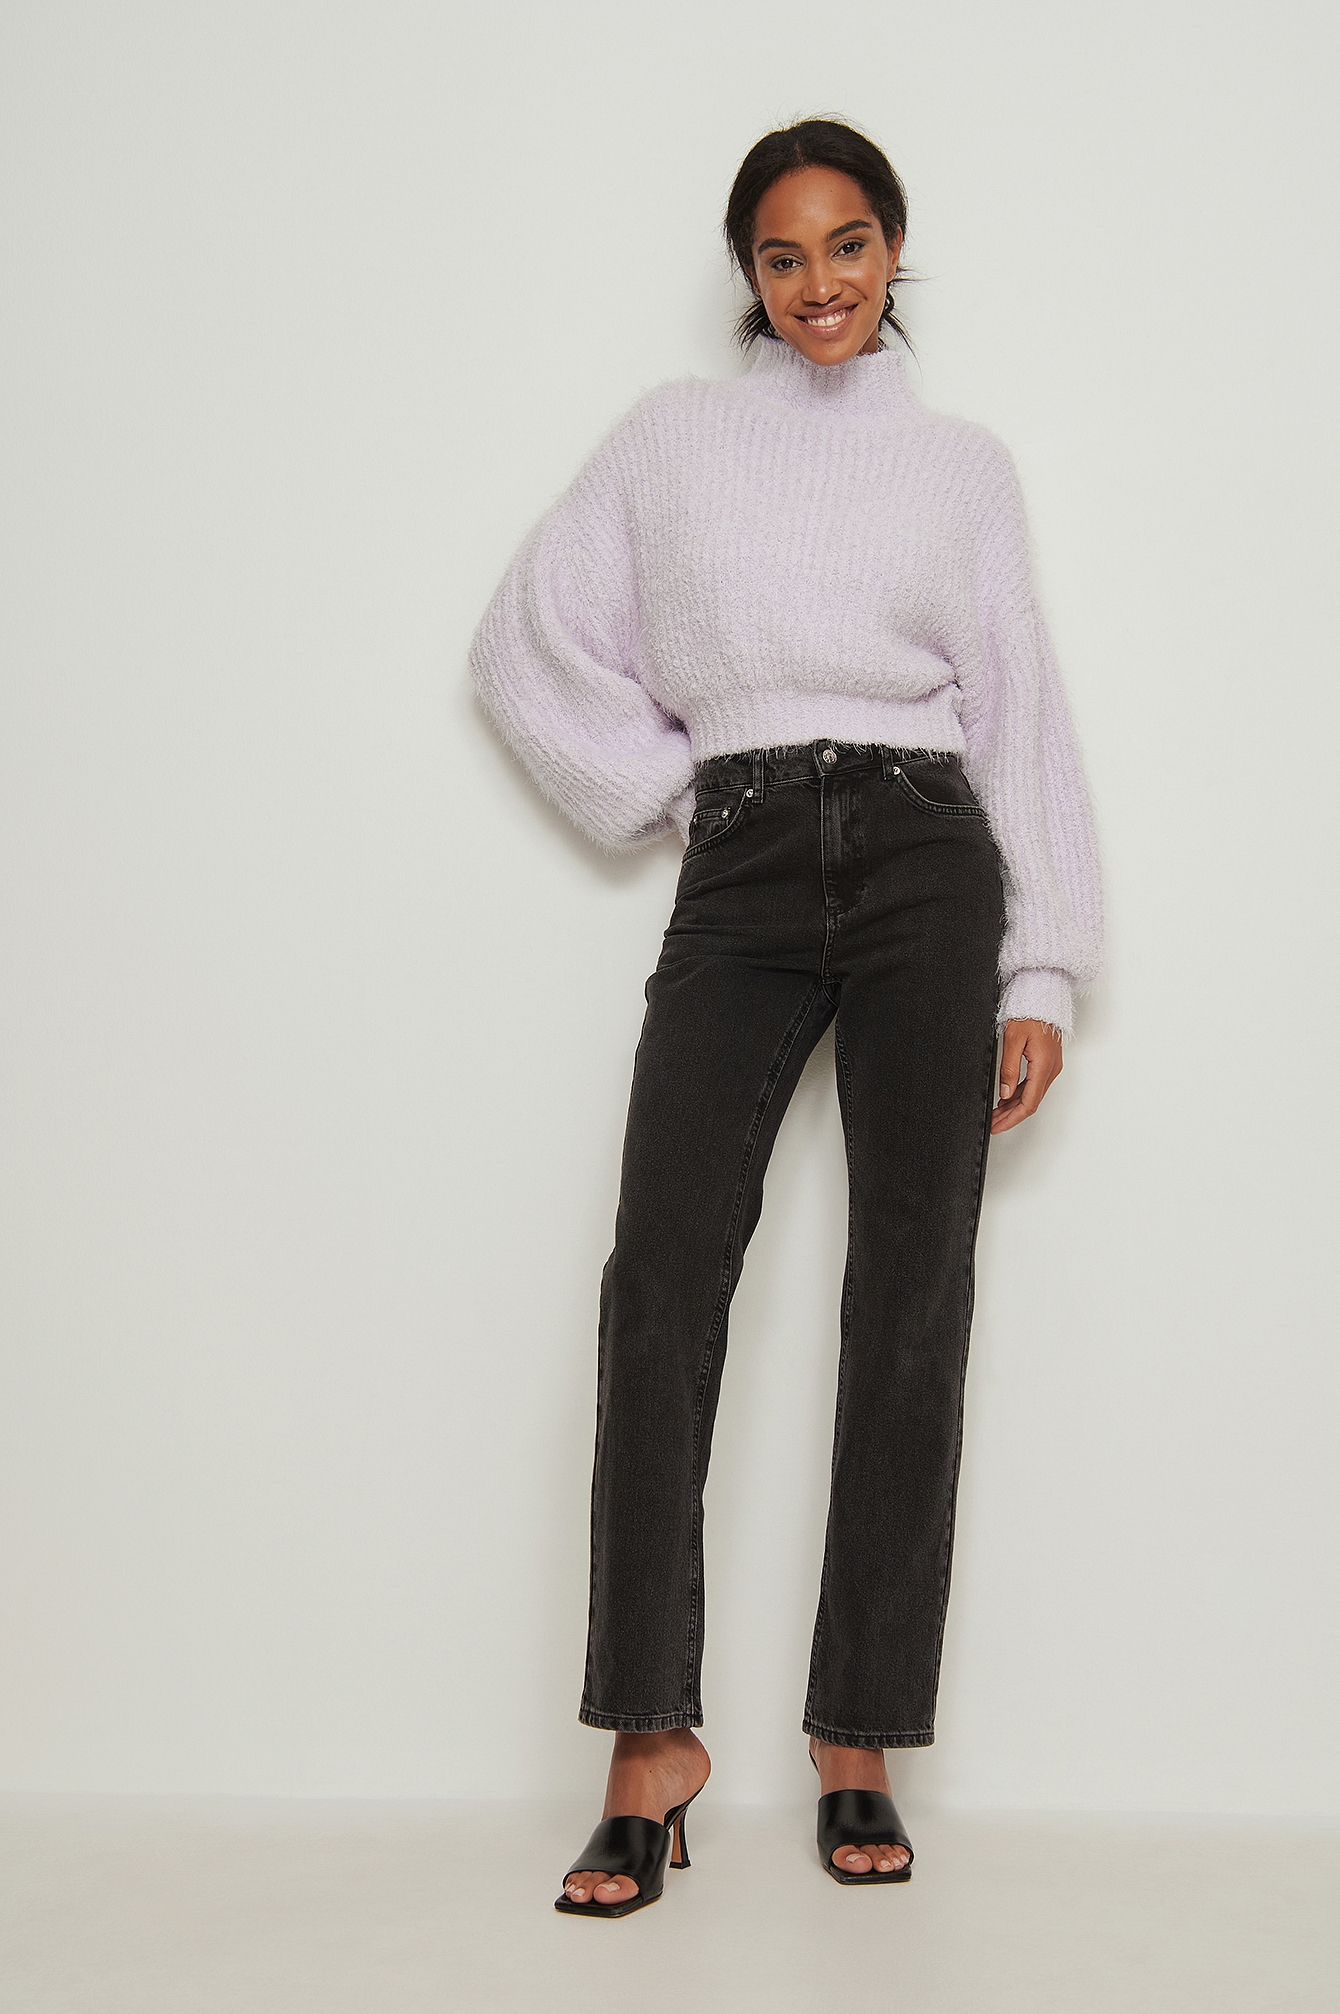 Fluffy Knitted Turtleneck Sweater Outfit